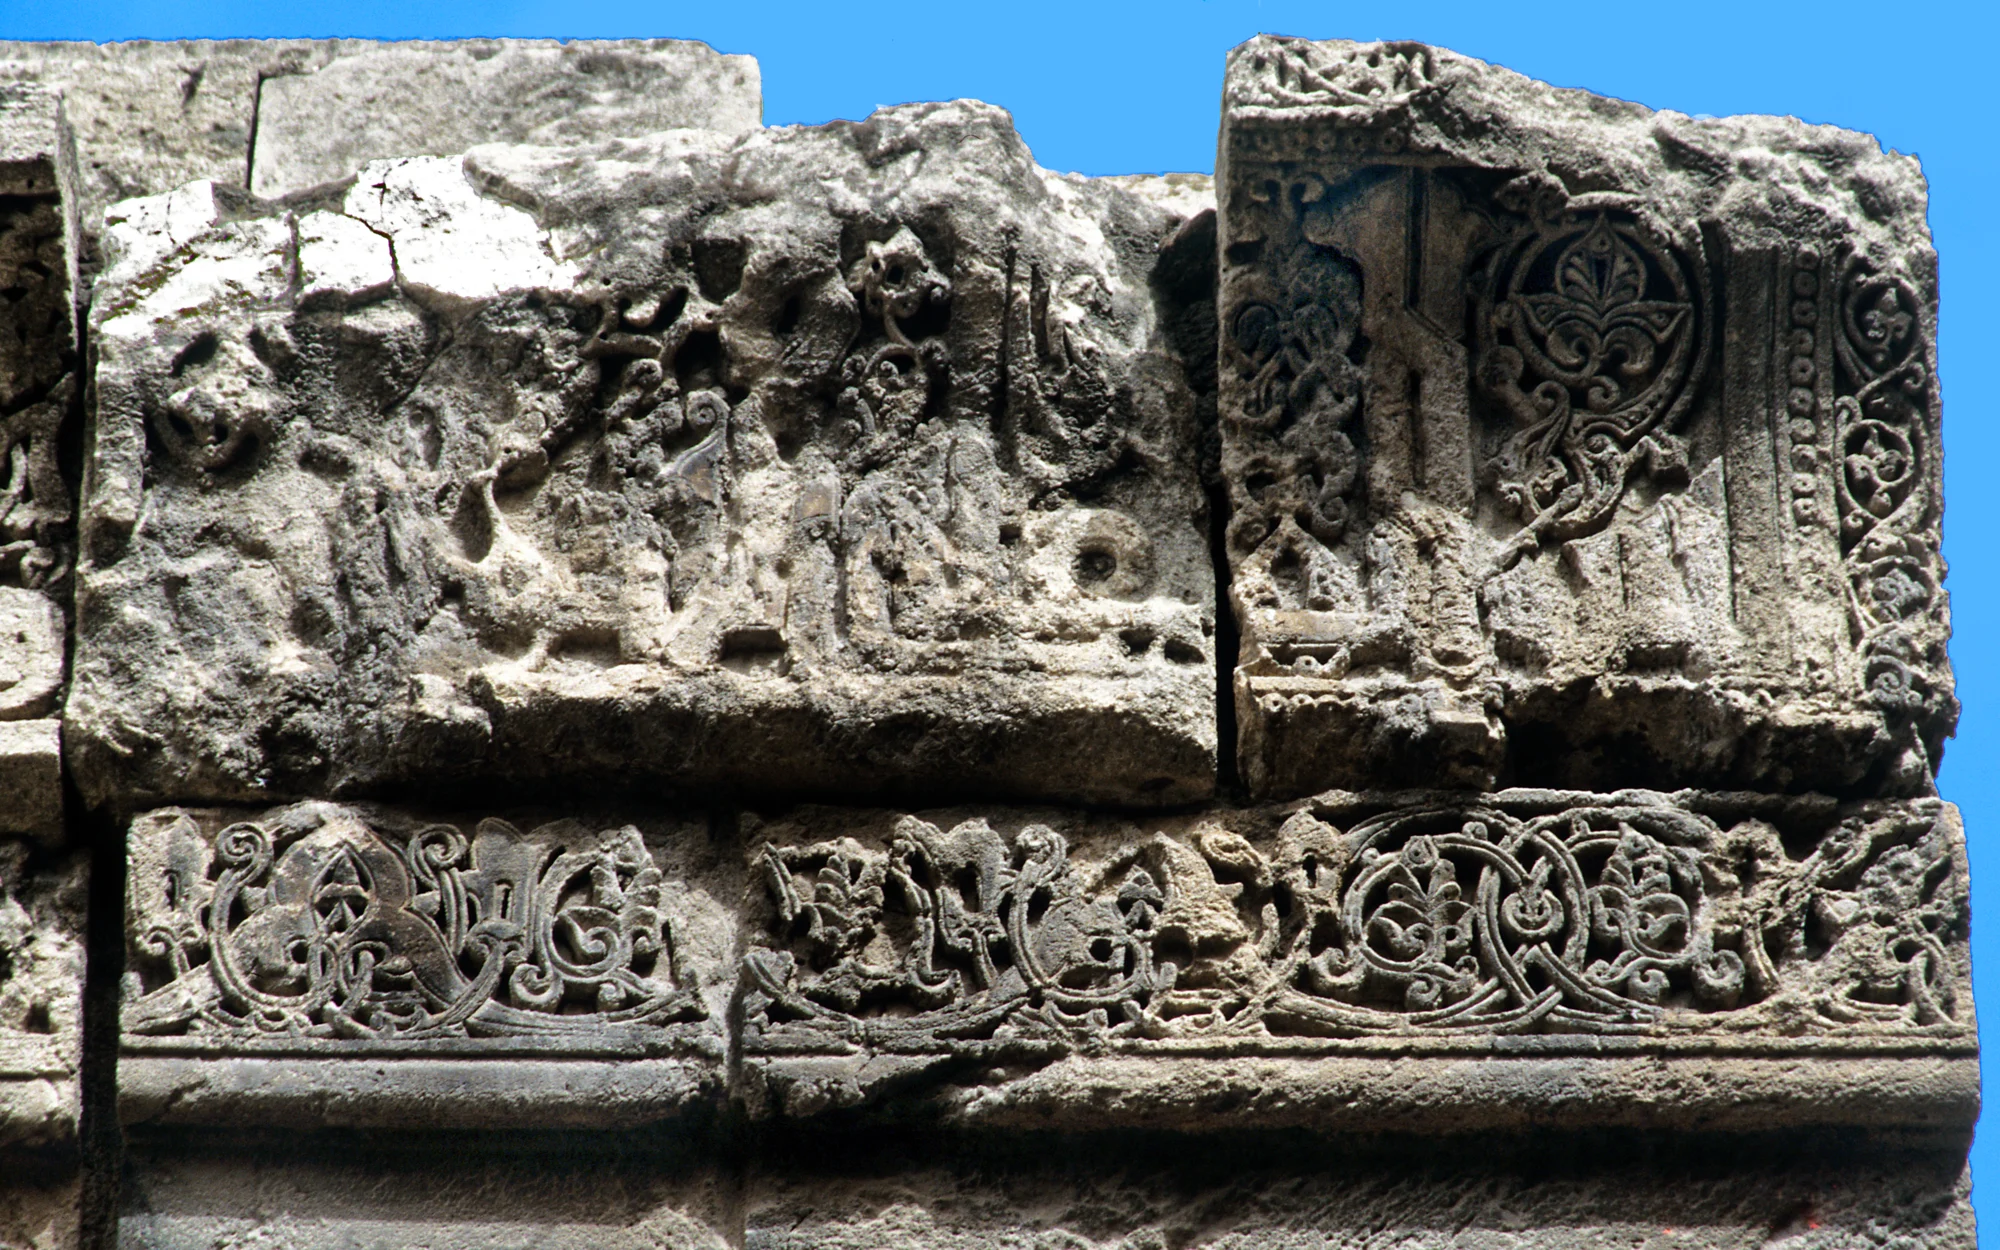 Jamiʿ ash-Shuʿaybiyya, the upper part - a cornice with floral motifs and a Qur'anic text in Kufic script